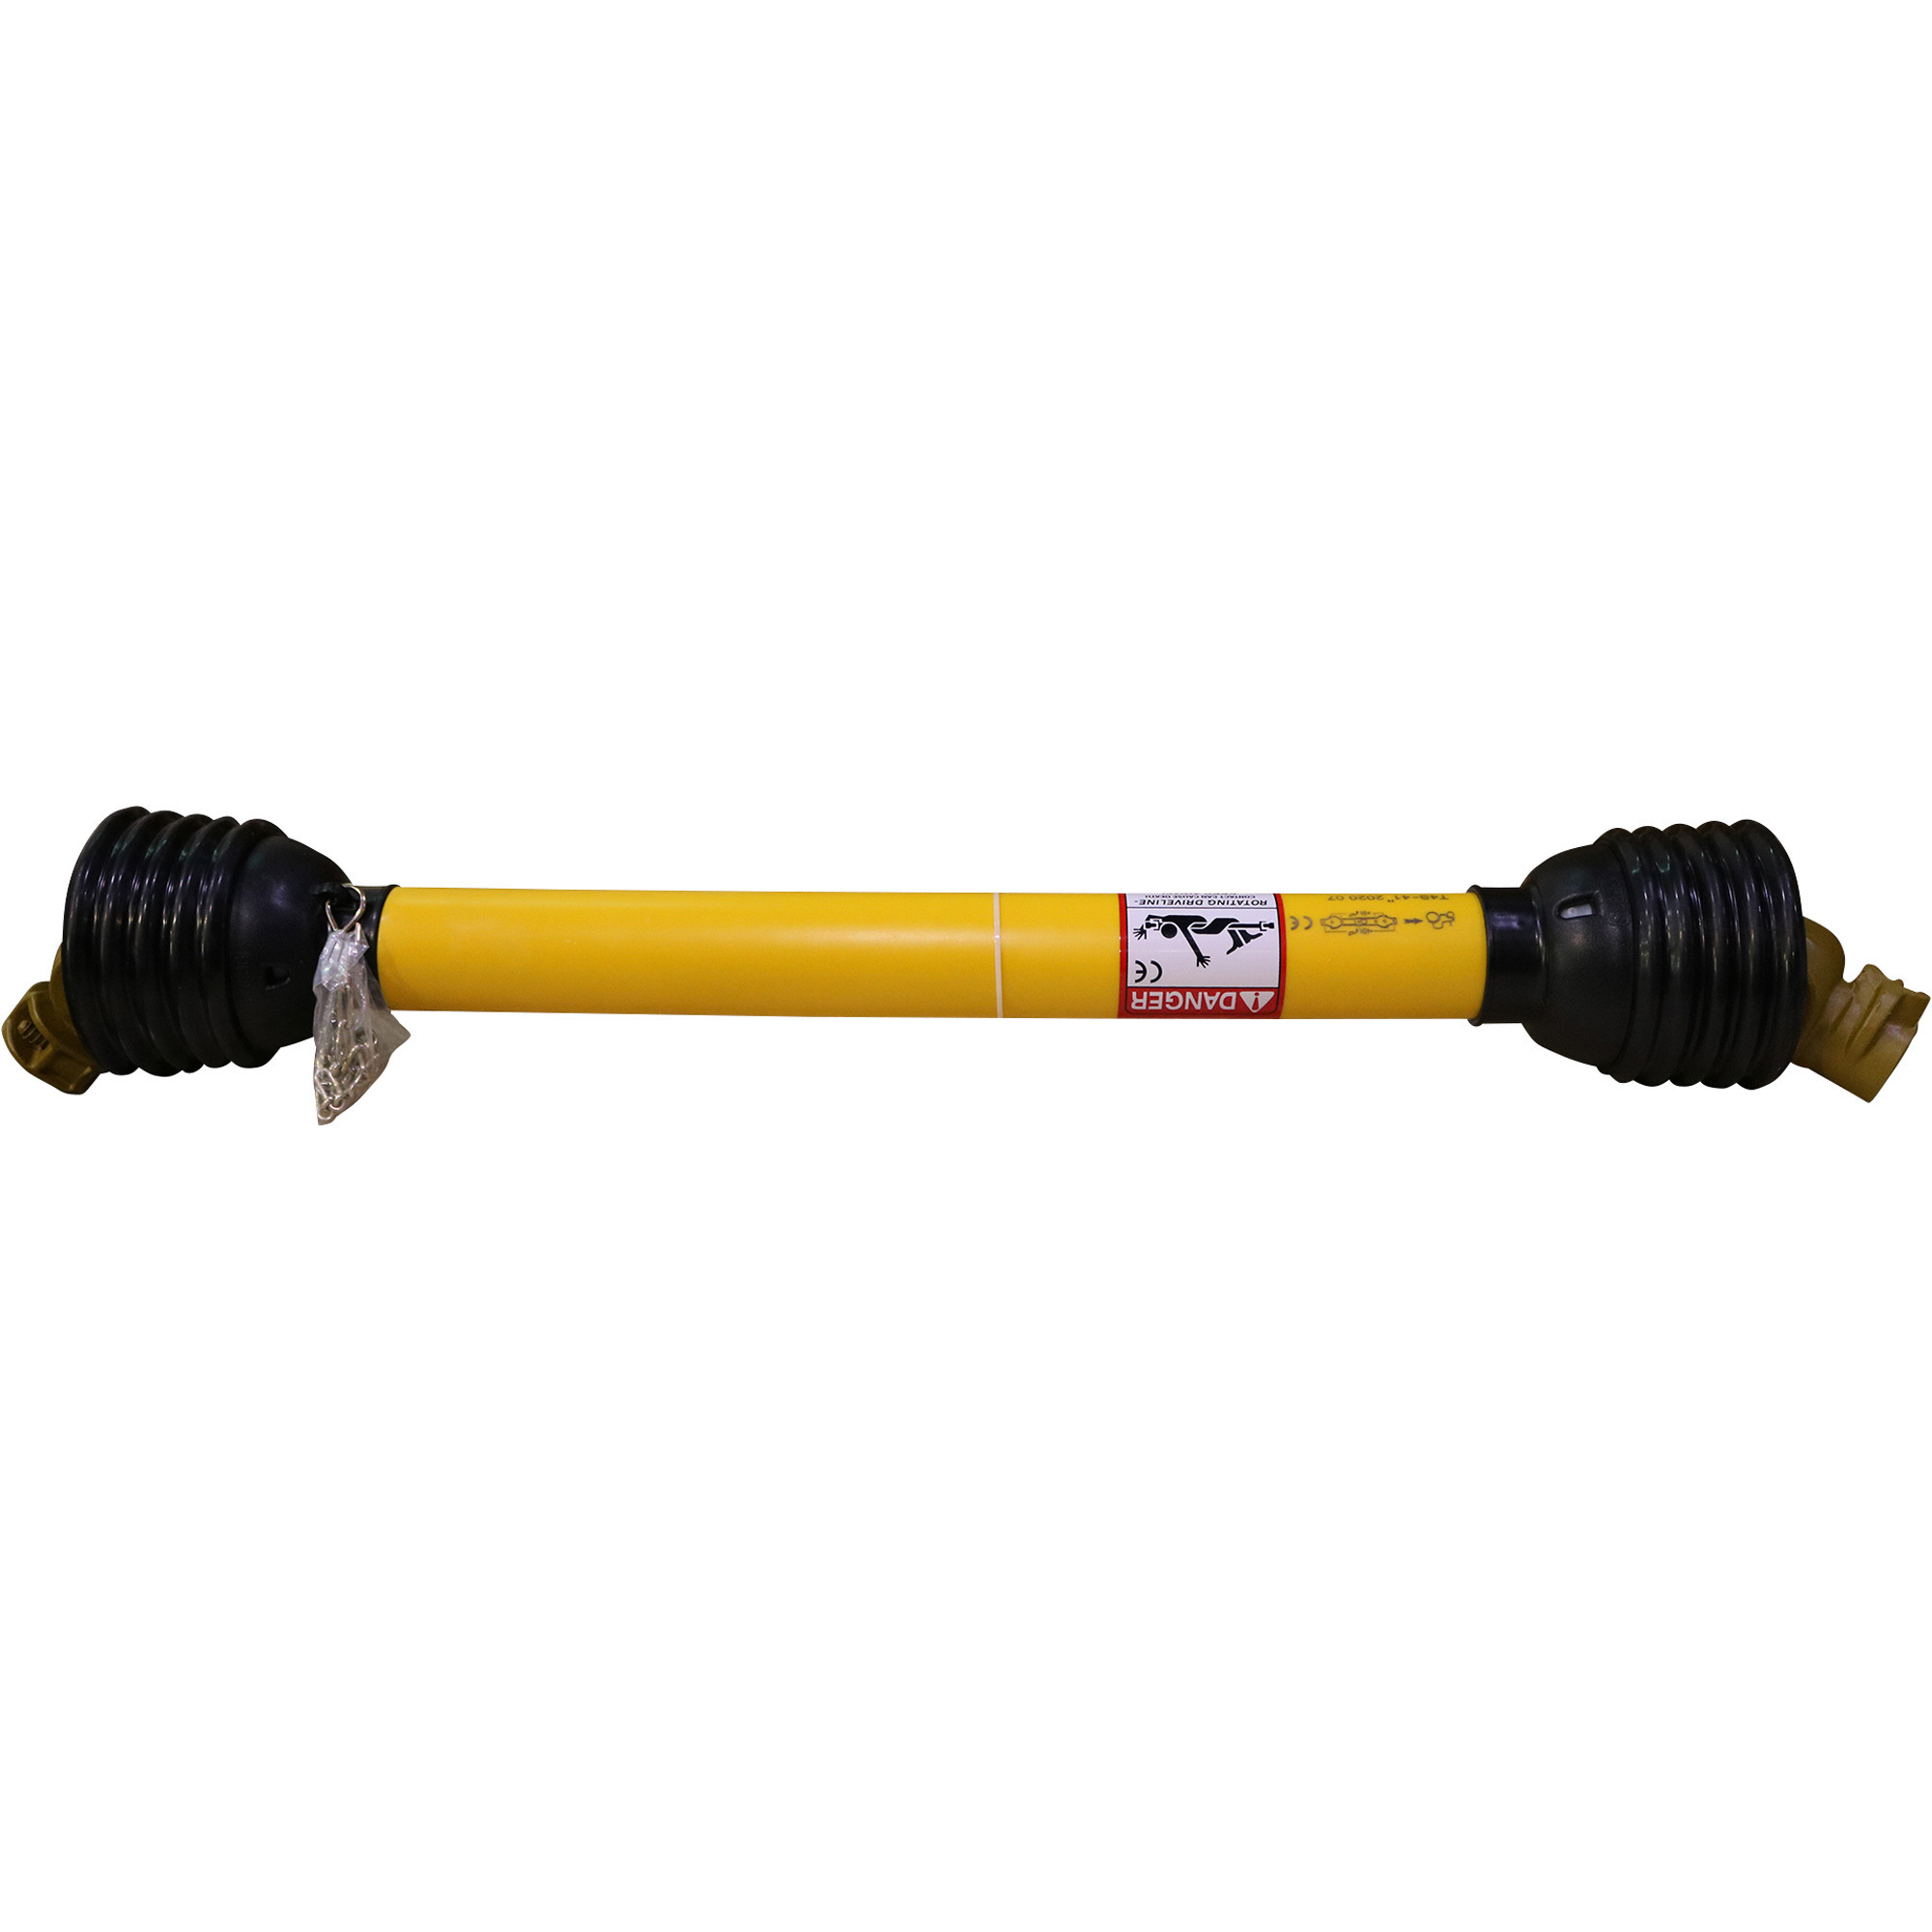 Braber Equipment General-Purpose PTO Shaft Assembly, 40Inch Collapsed Length, Model 69.885.004